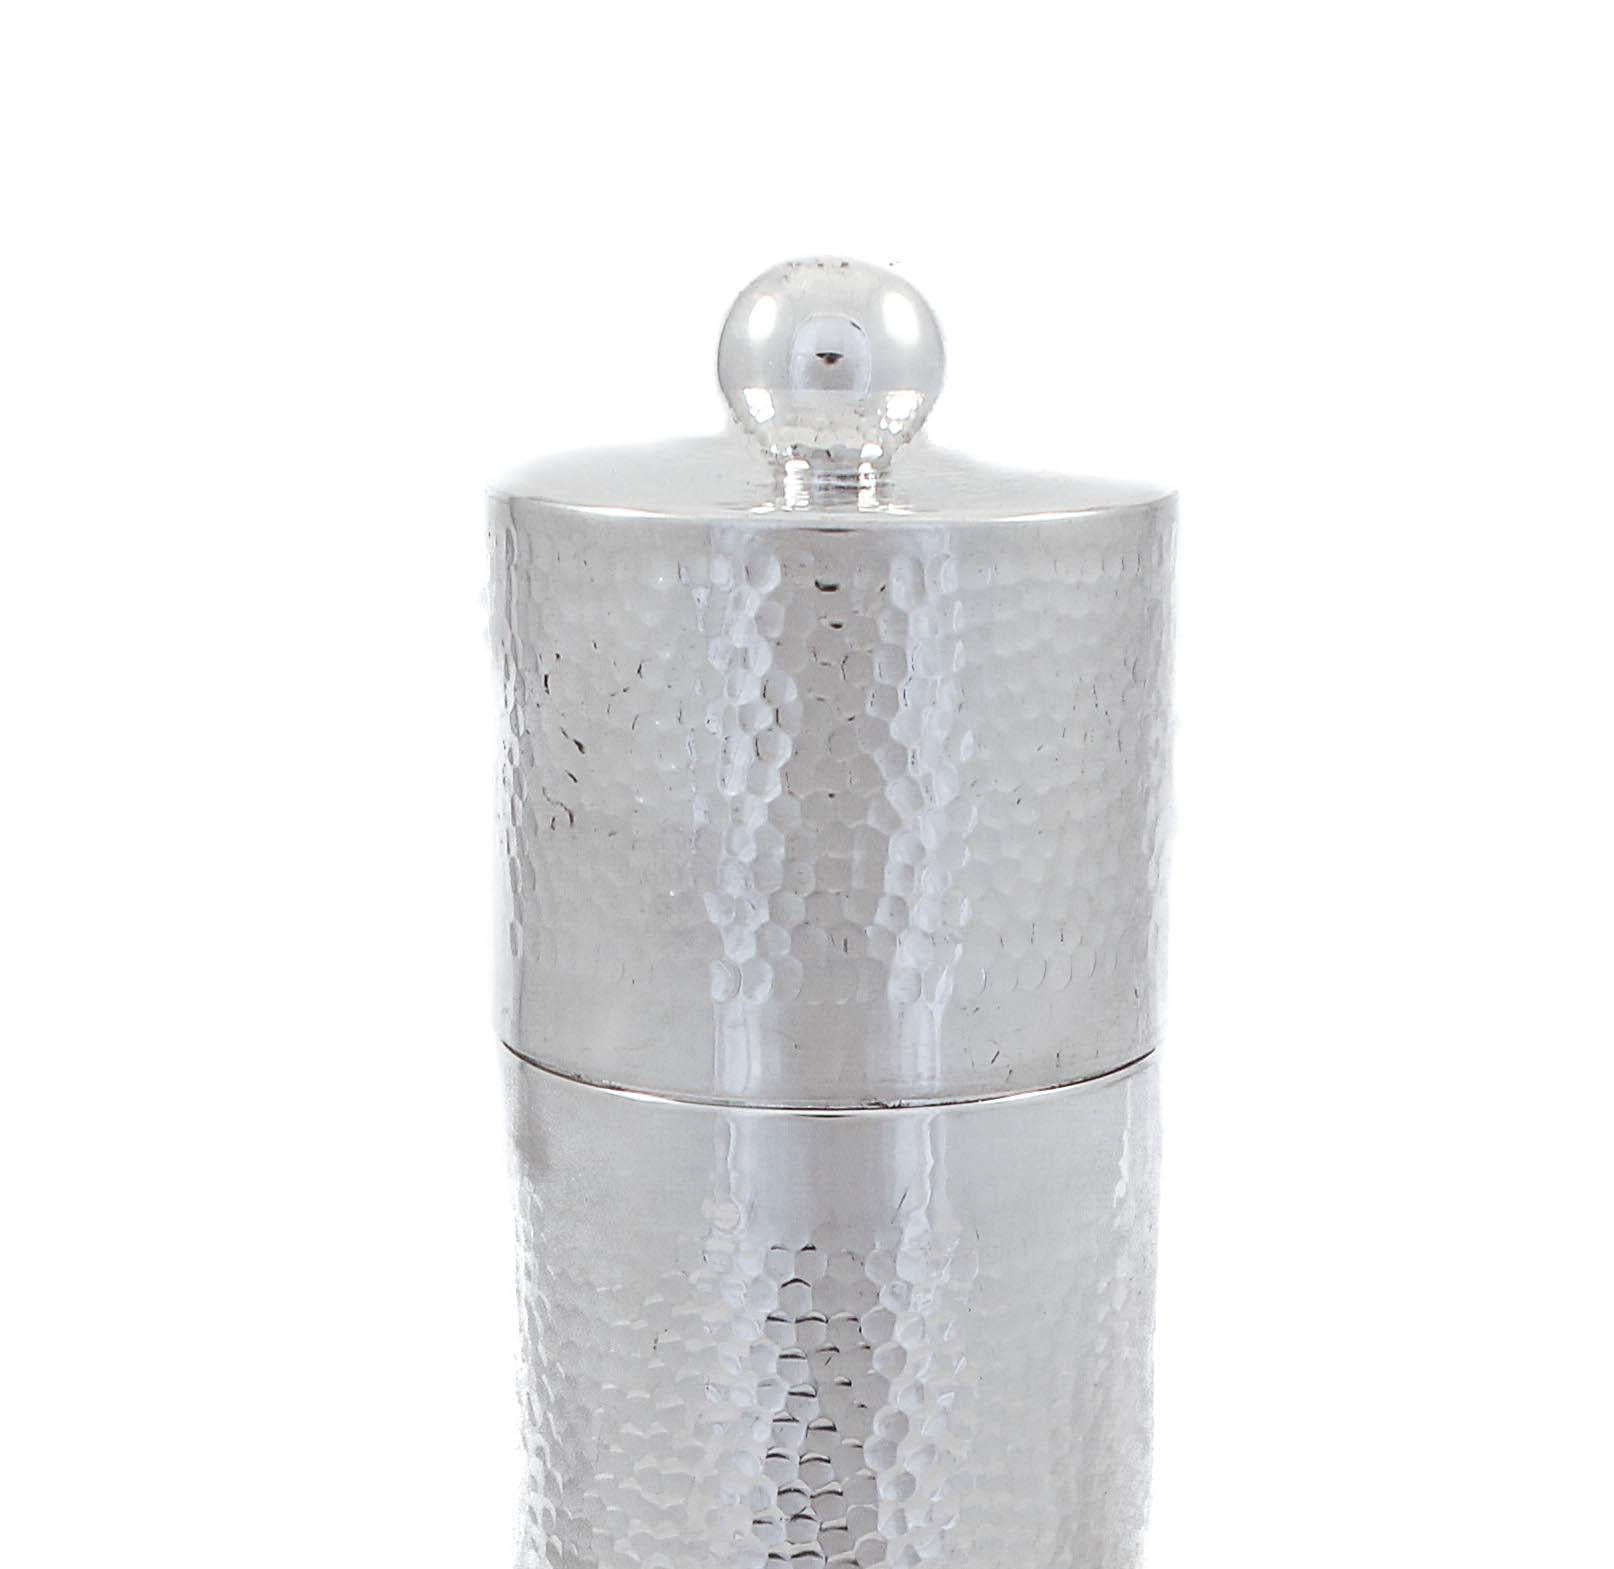 We are happy to offer this sterling silver Megillah Case. A Megillah is the scroll that tells the story of Esther and how she saved her people (Jews) from annihilation. The story is read twice on Purim and a scroll is used in the synagogue to read